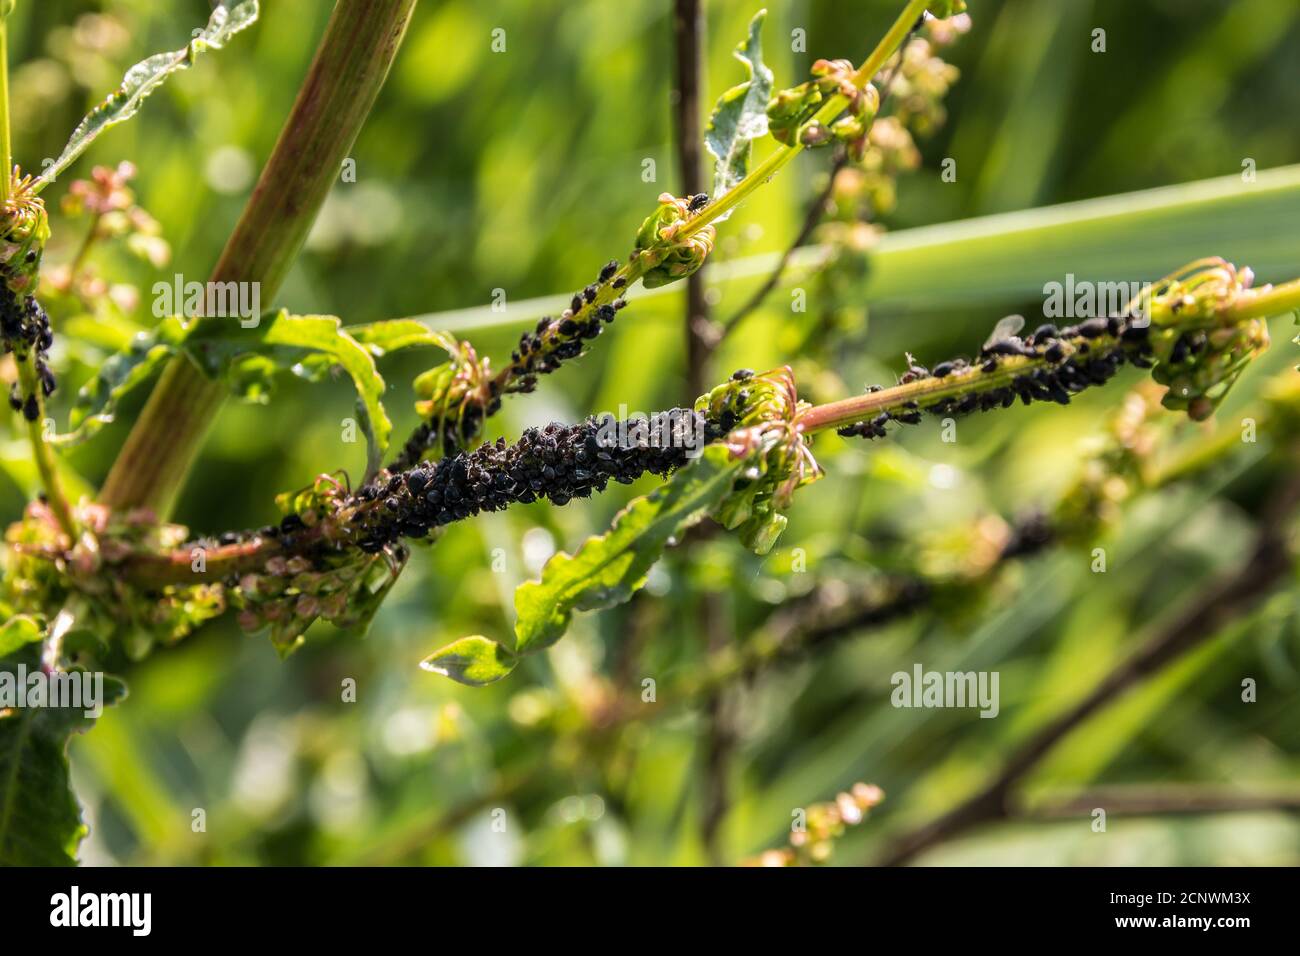 Hundreds of black plant lice on a green branch Stock Photo